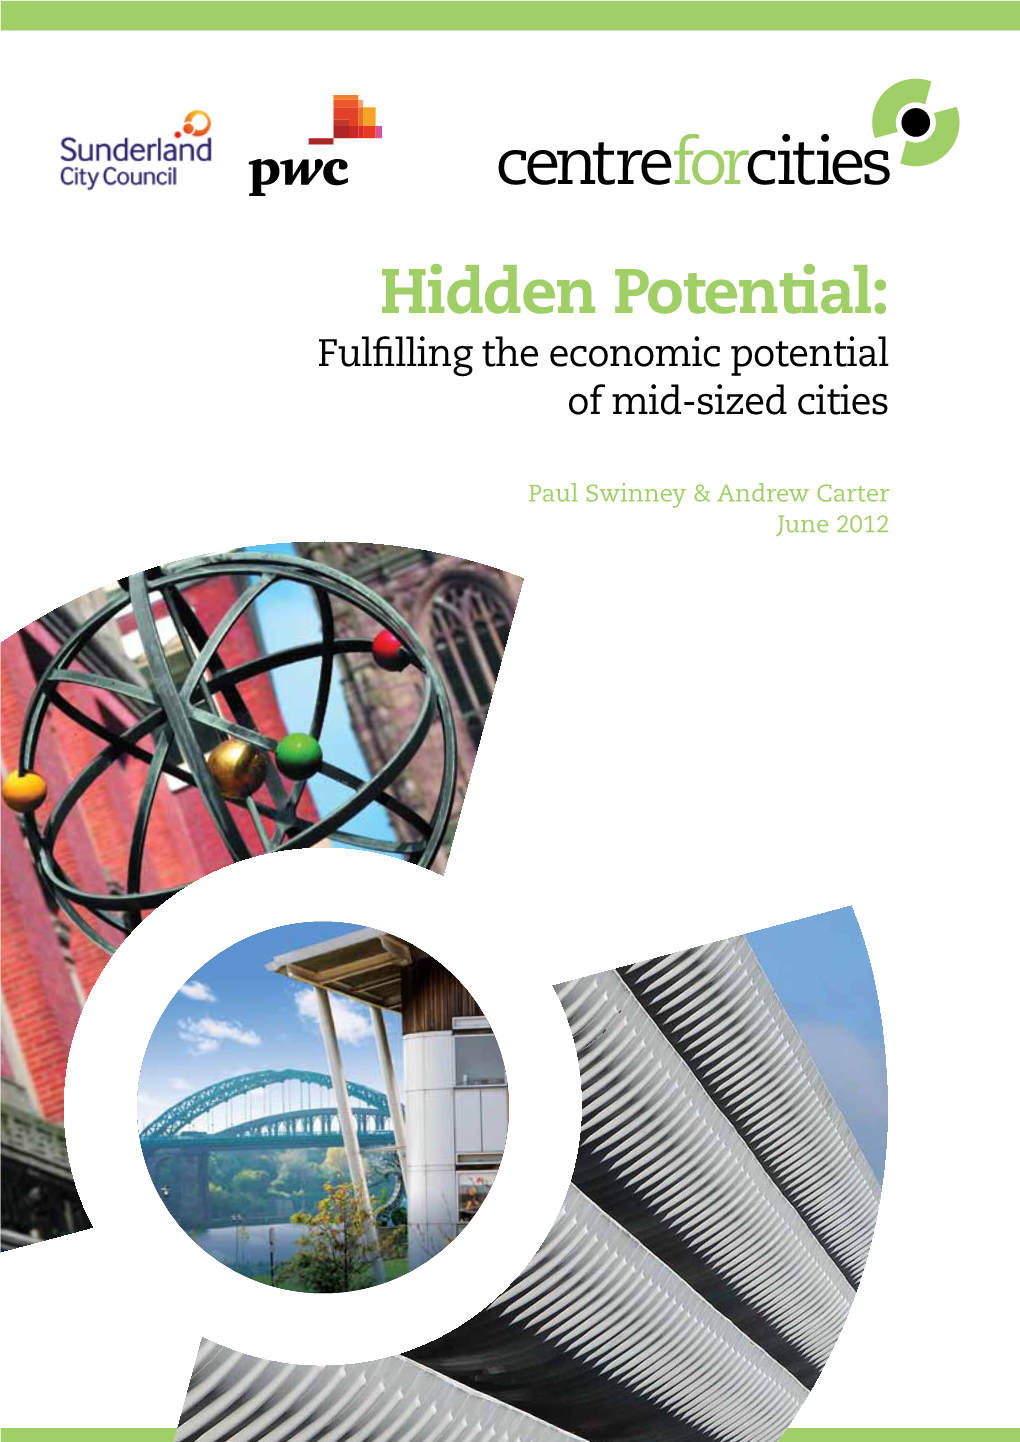 Hidden Potential: Fulfilling the Economic Potential of Mid-Sized Cities